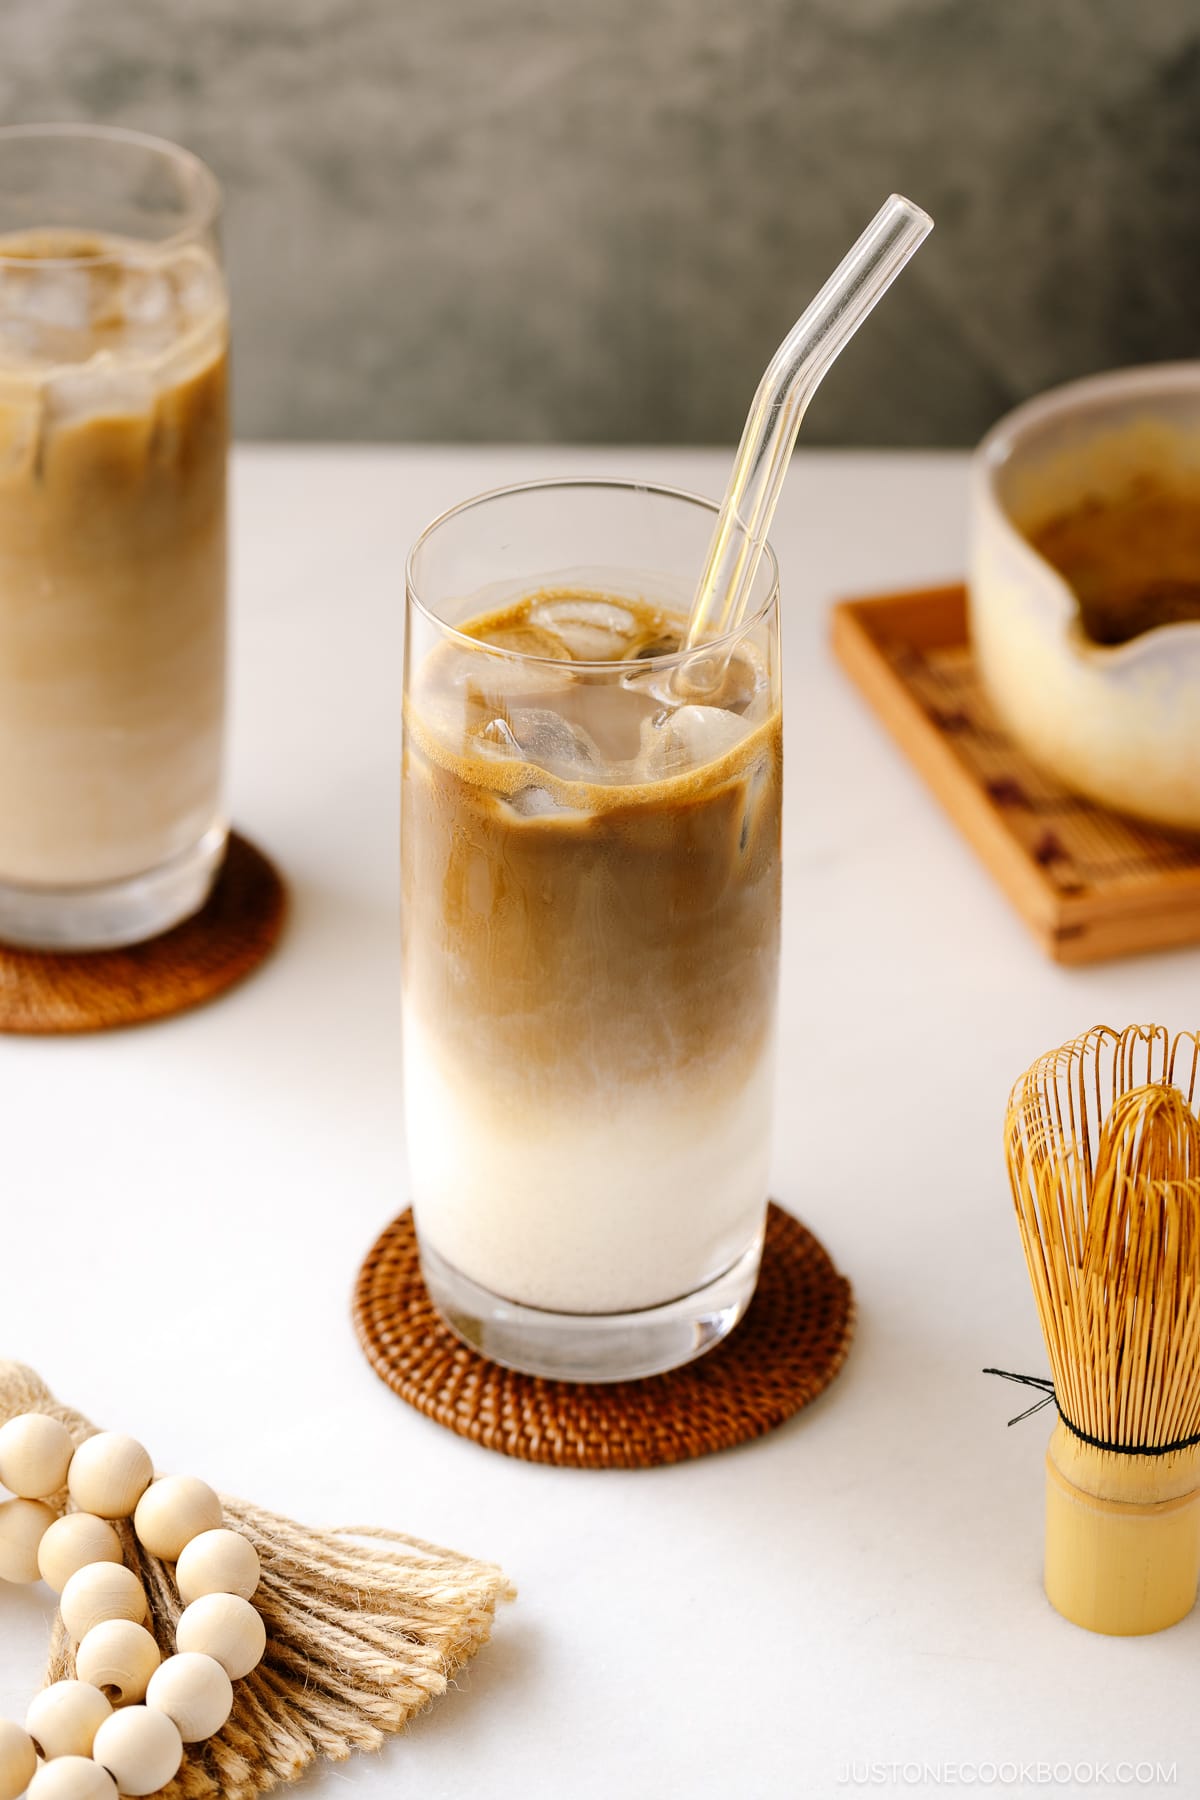 A tall glass filled with iced hojicha latte, showing two layers of milk and chocolate-color roasted green tea (hojicha).